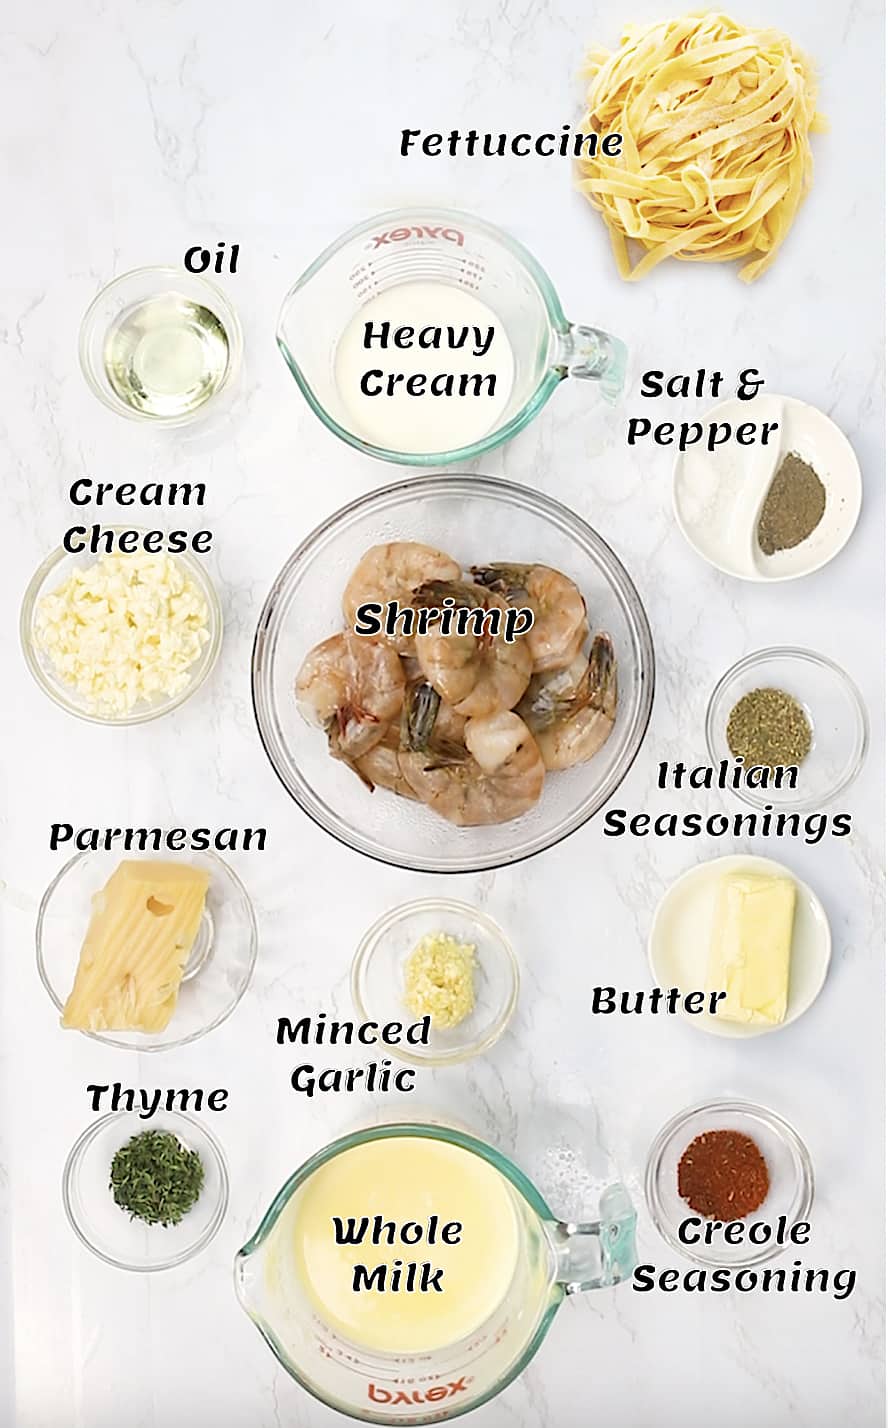 Recipe ingredients for seafood fettuccine